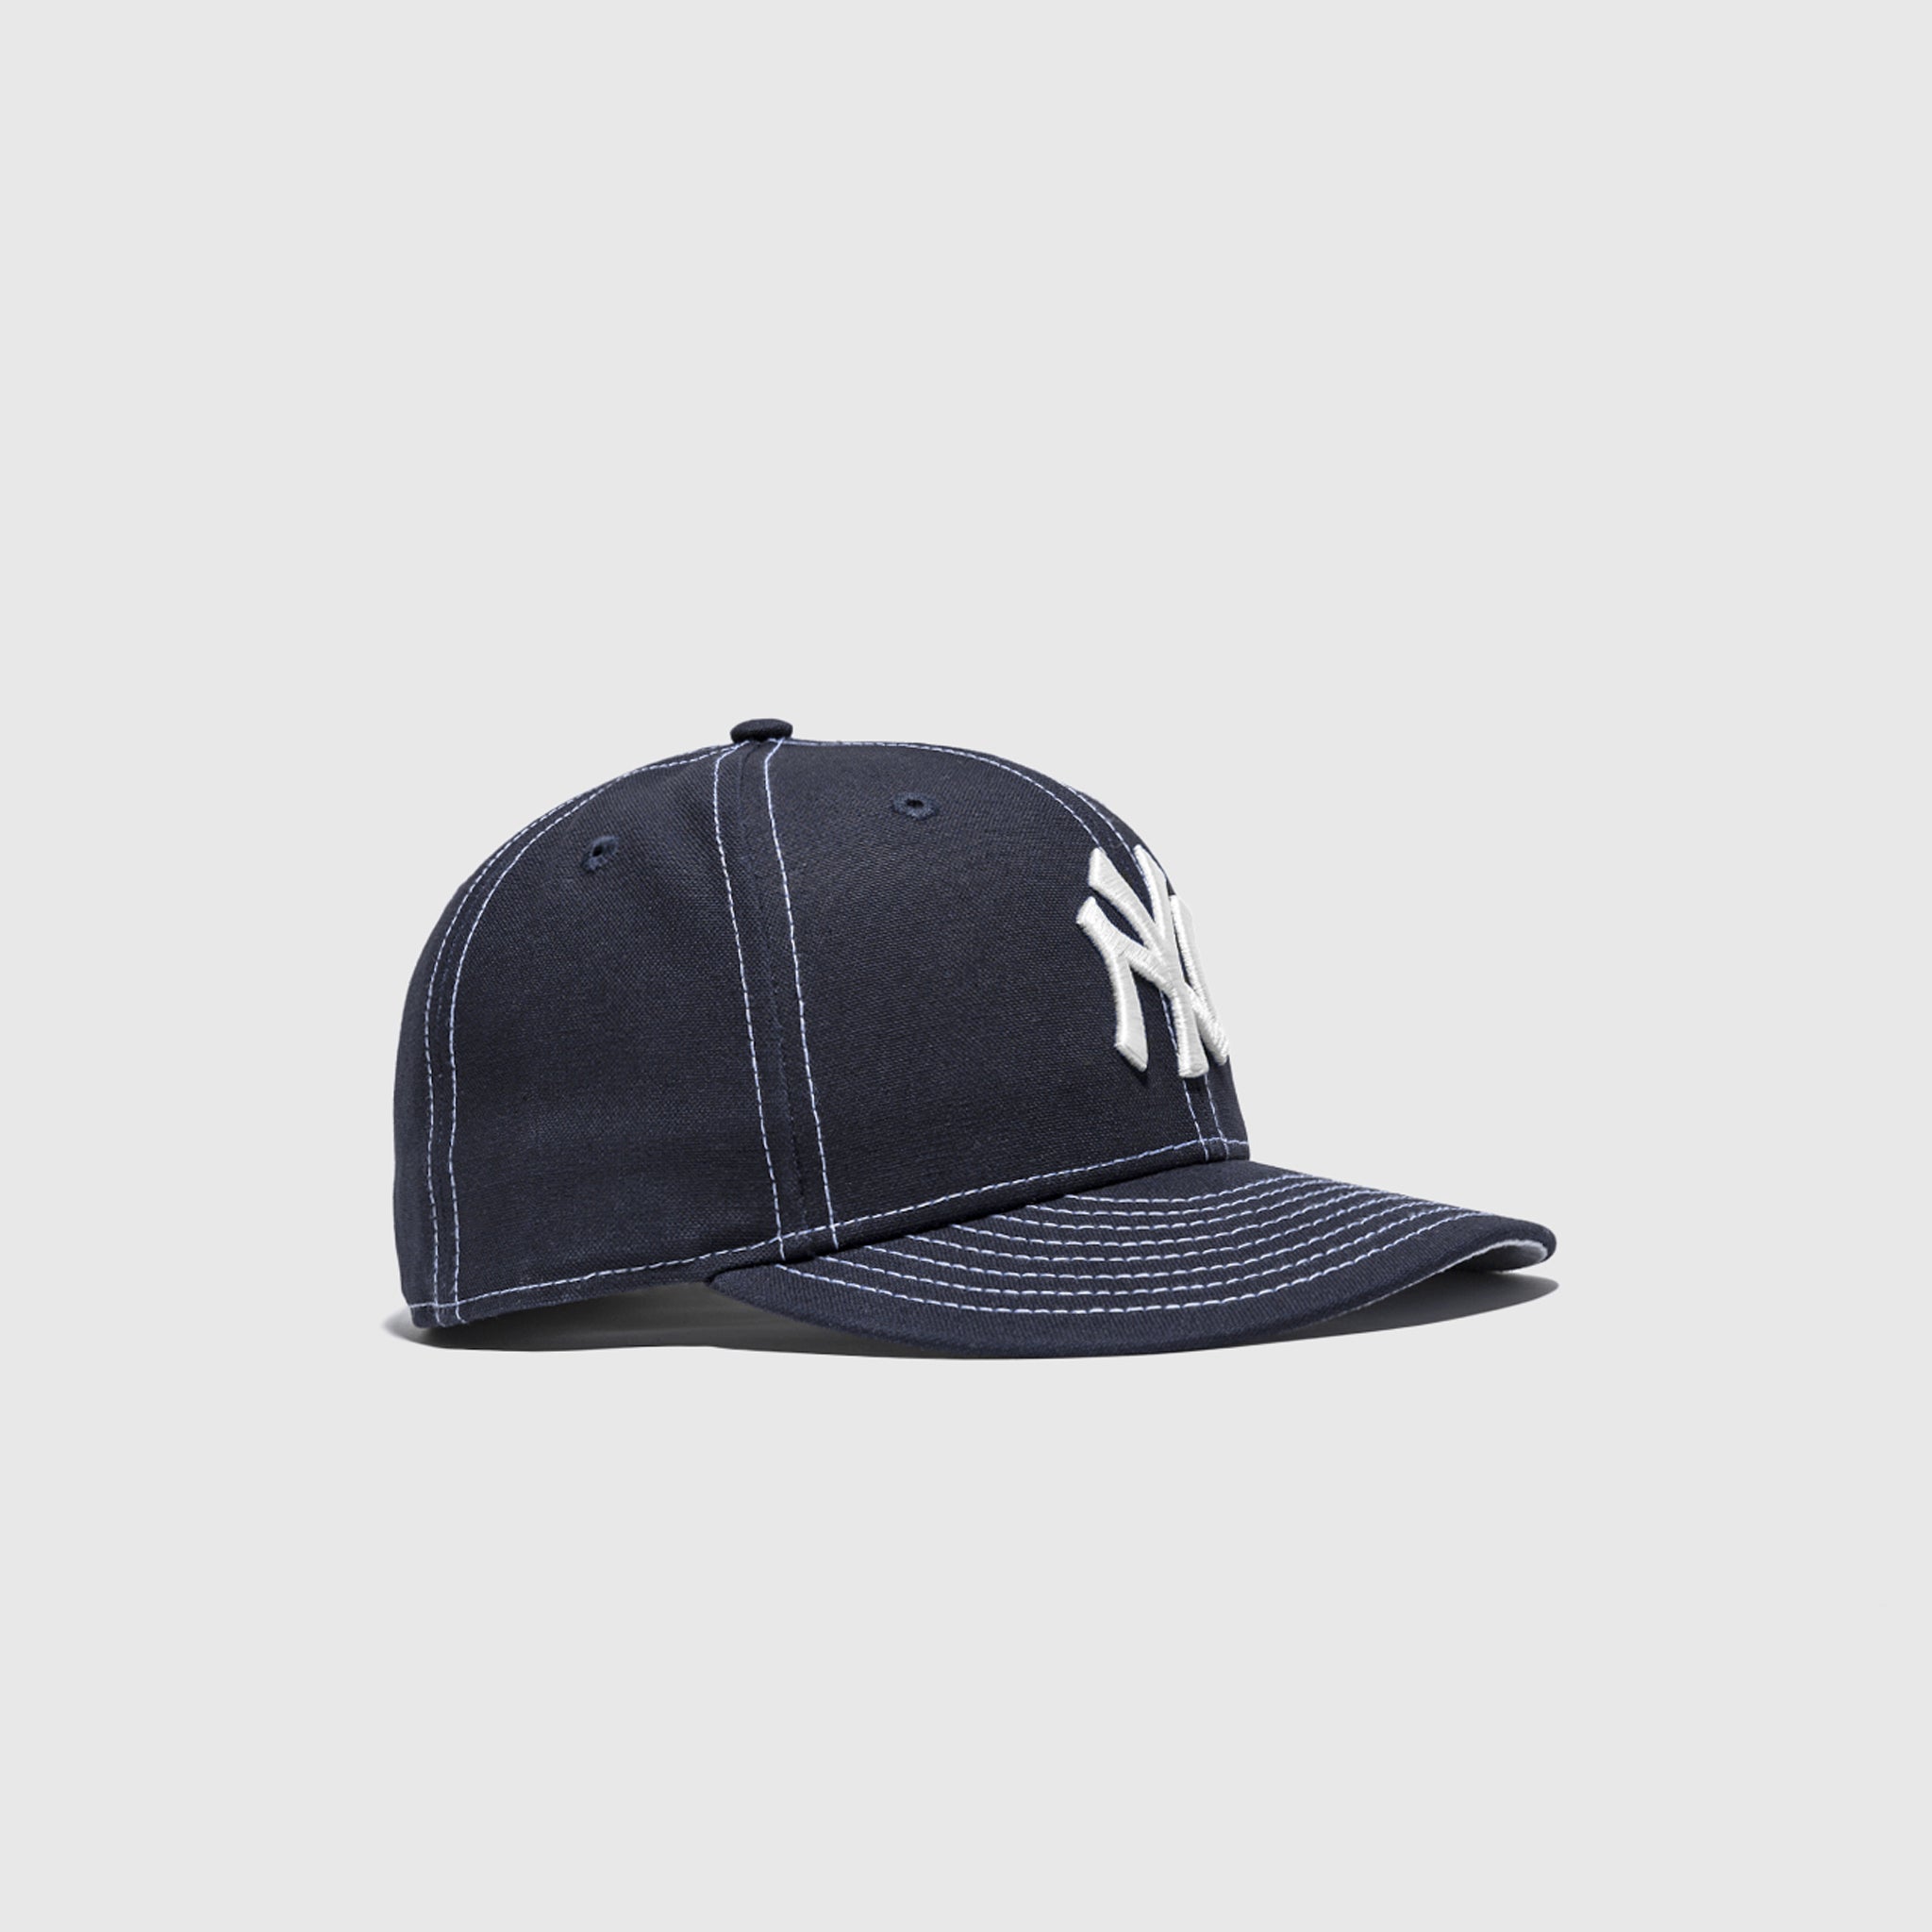 CONTRAST NEW YORK YANKEES 59FIFTY FITTED X PACKER